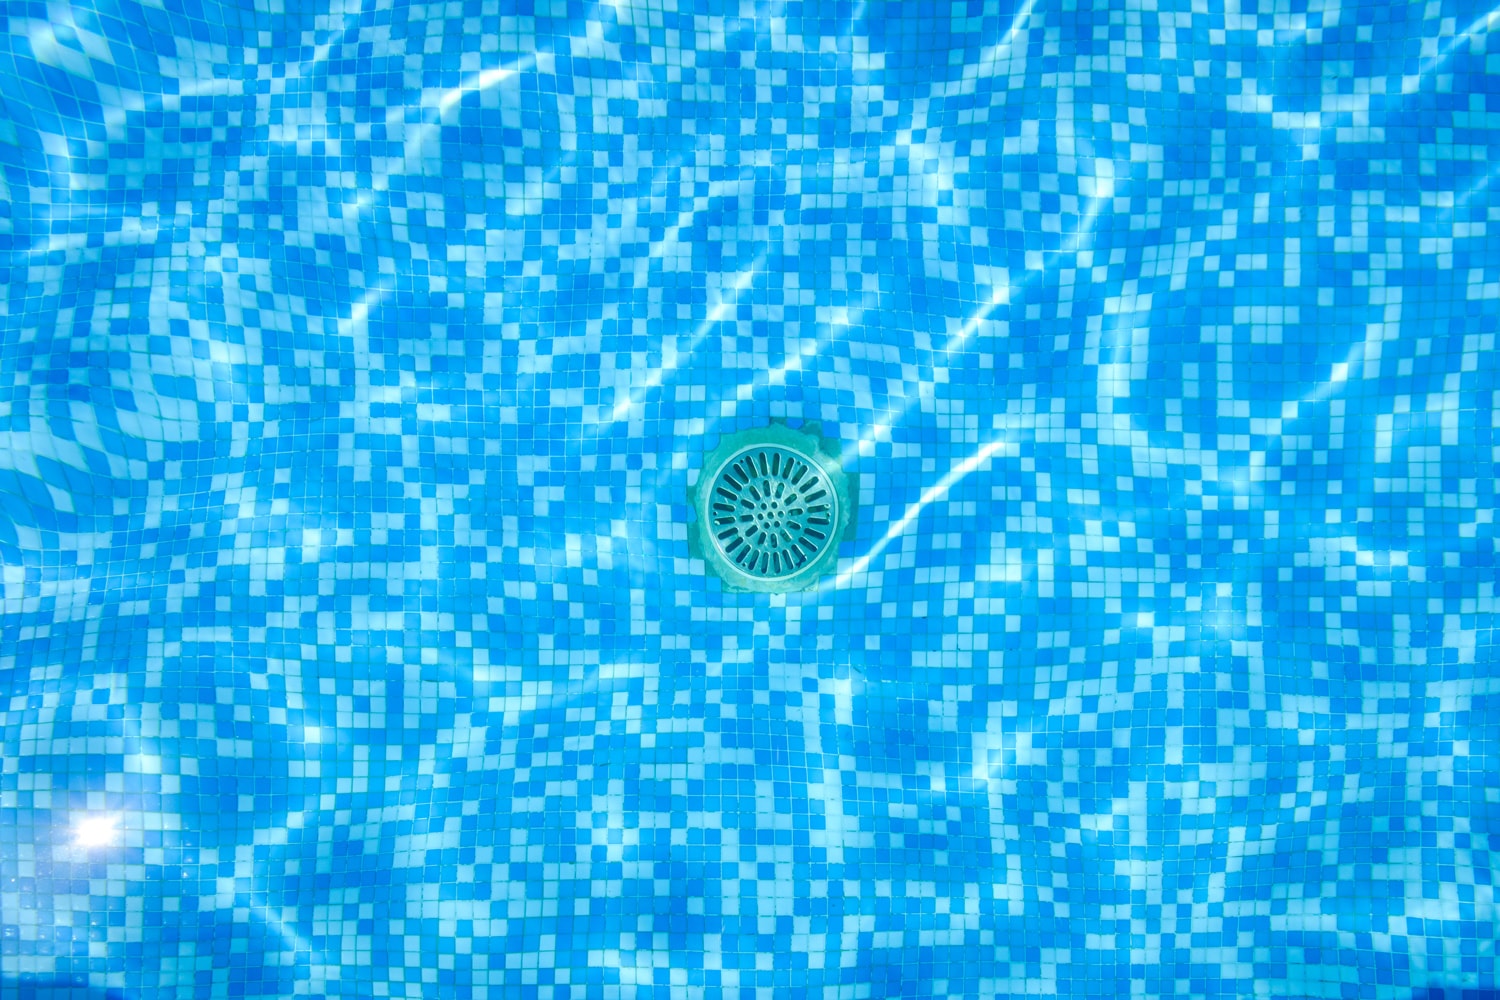 Drain of a pool, seen through the water from above.